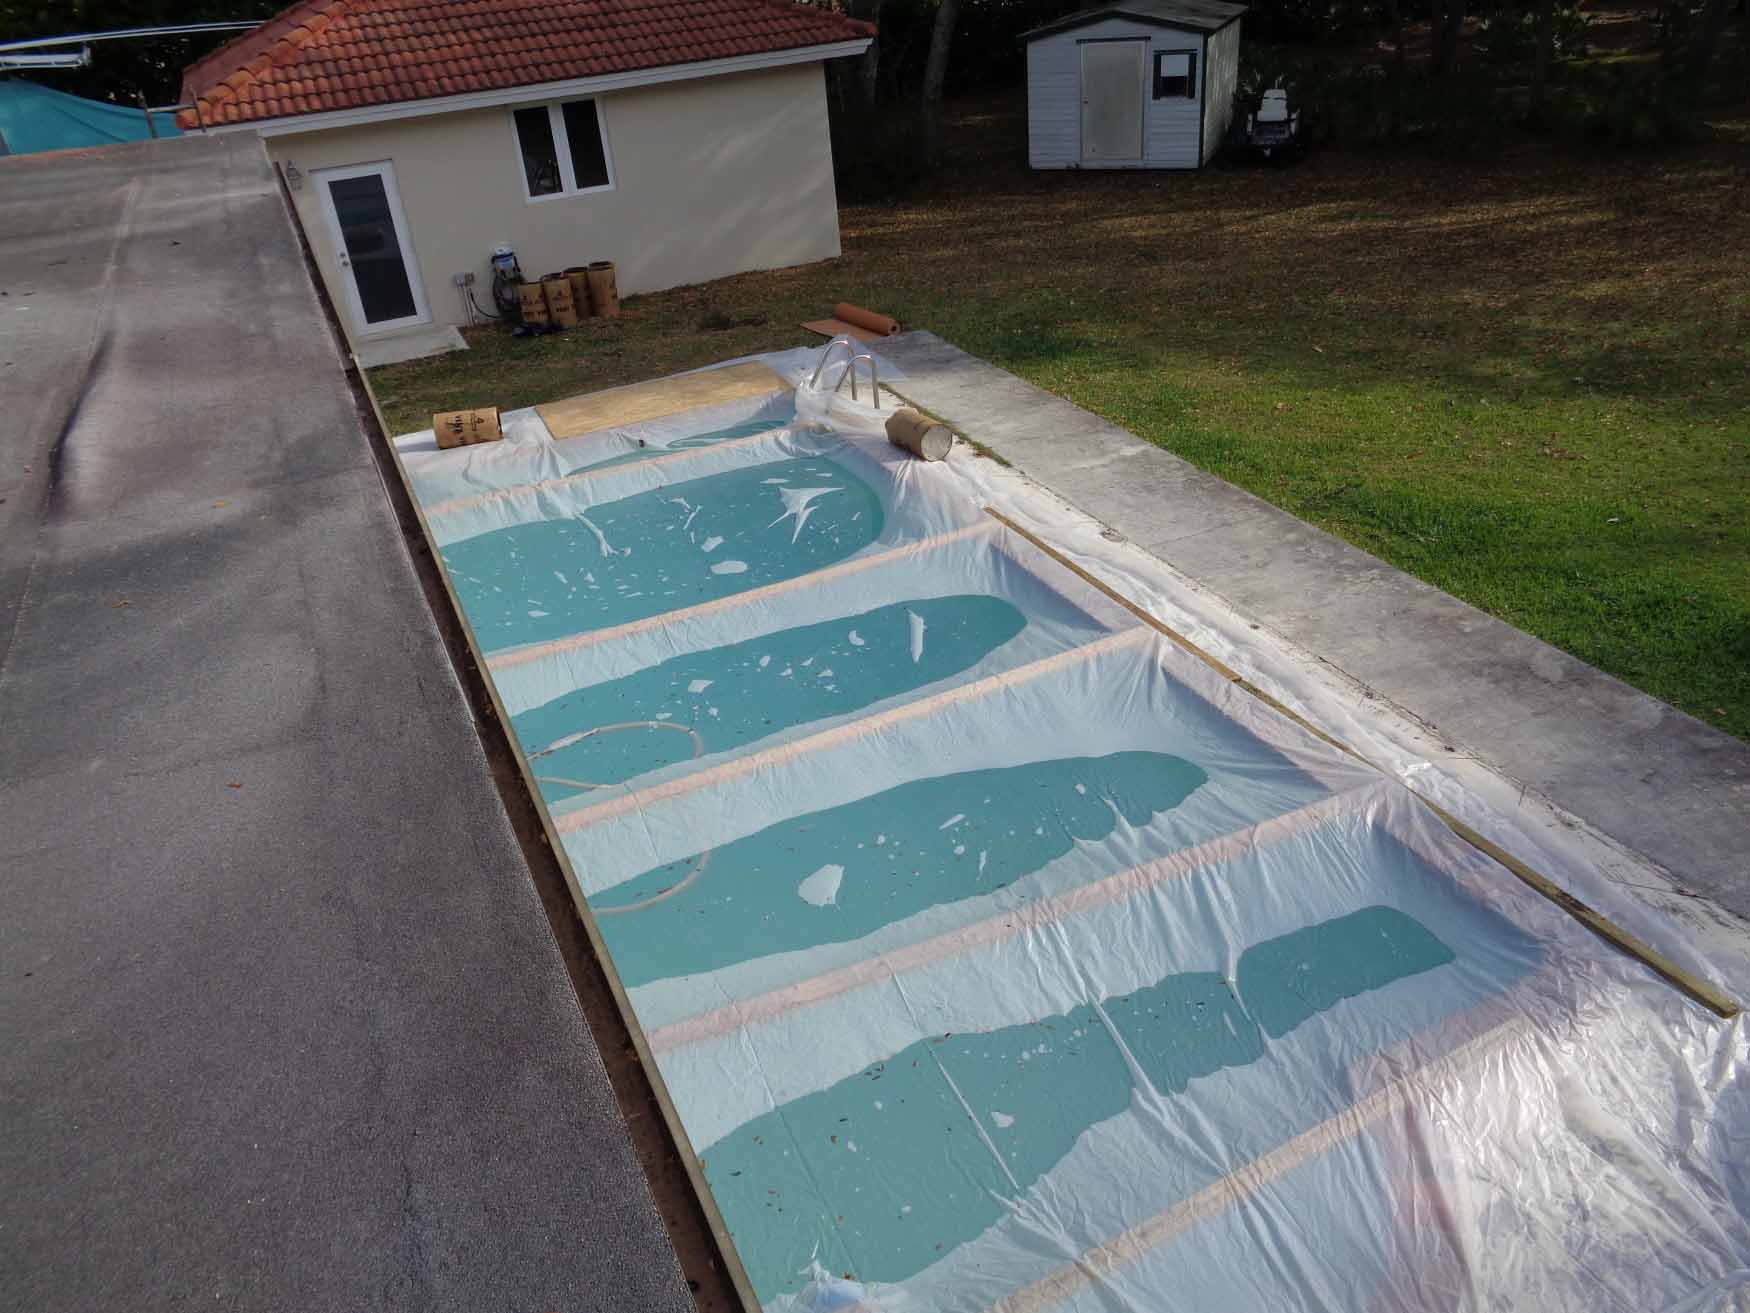 Pool protection from debris